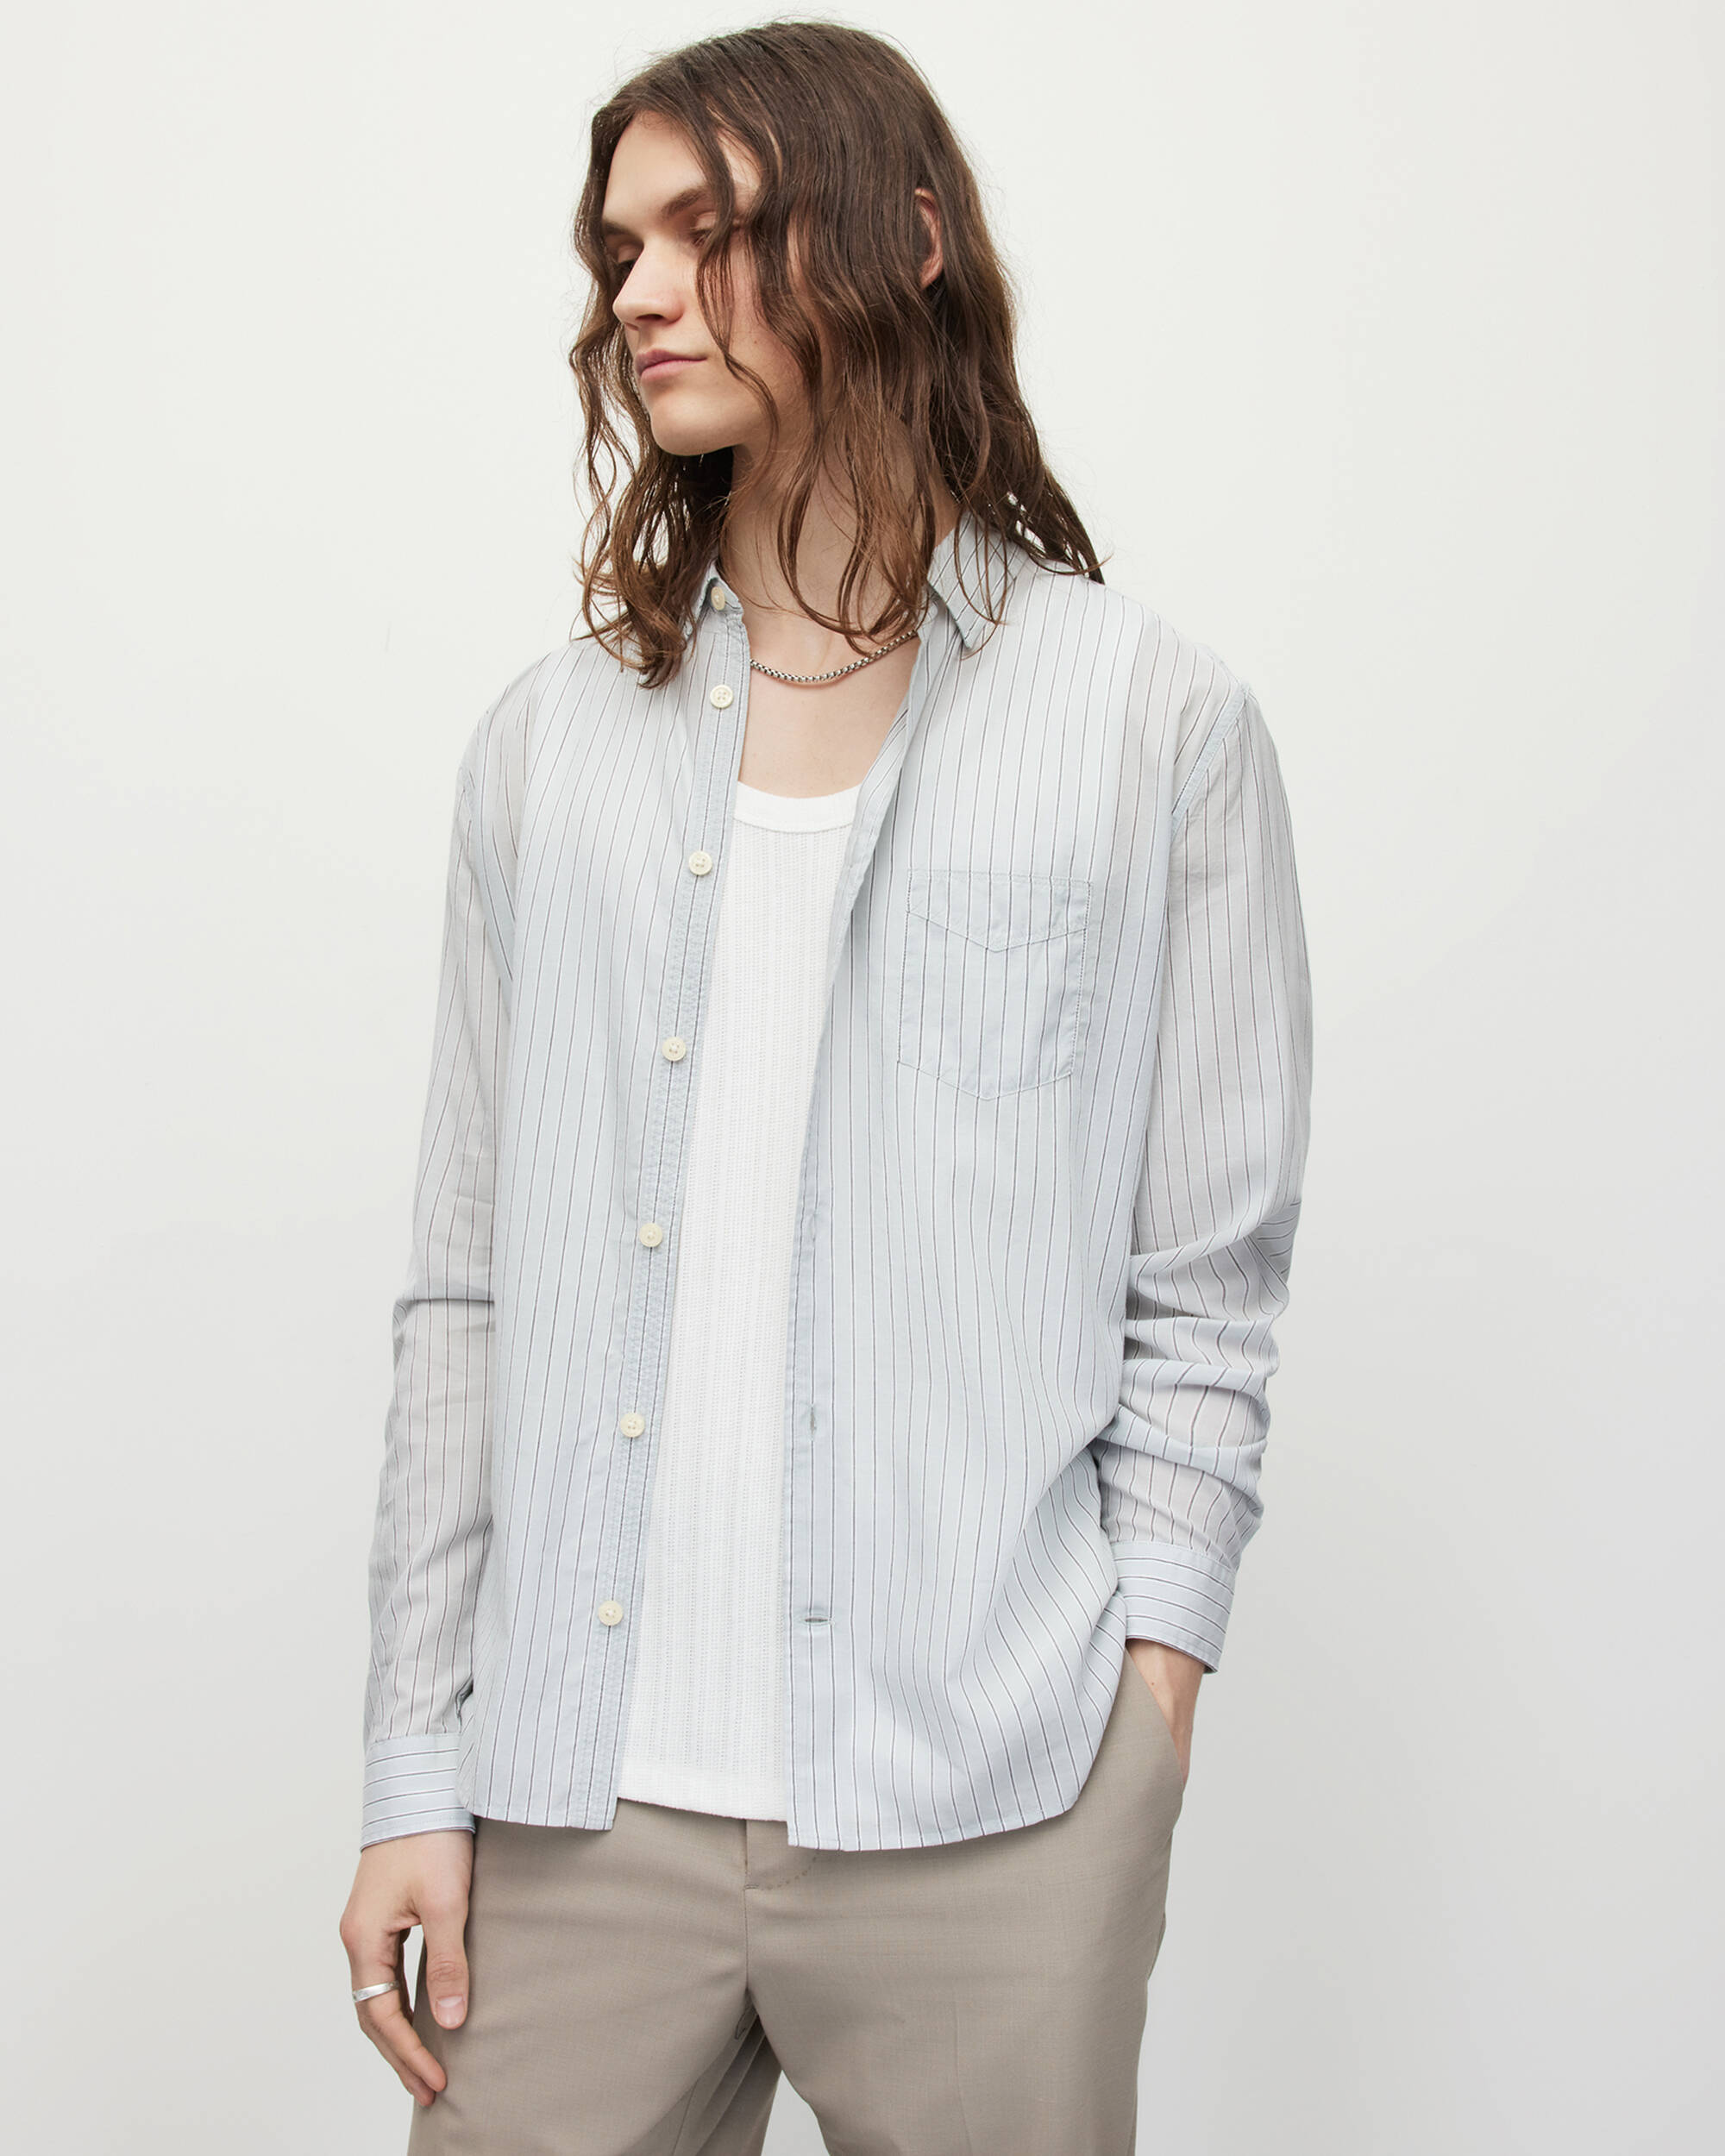 Formentera Striped Relaxed Shirt